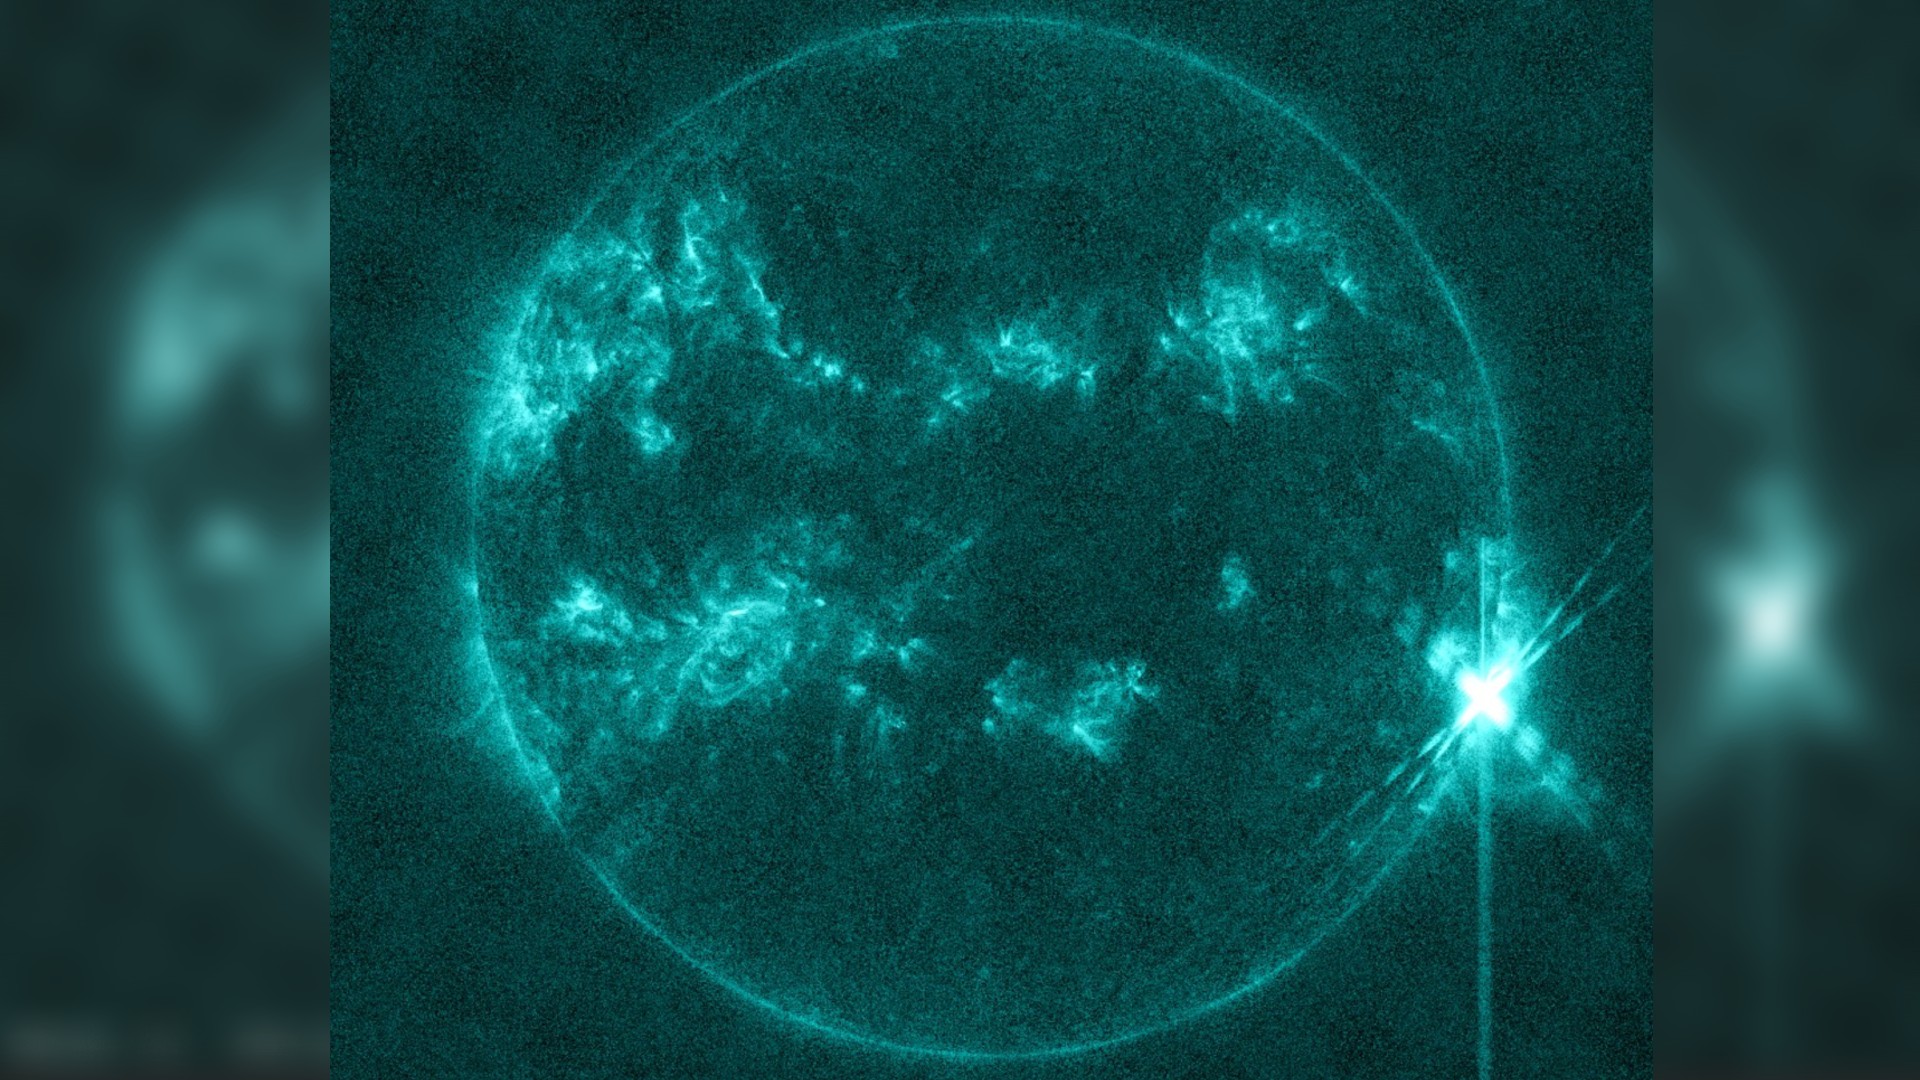 Sun unleashes massive X8.7 solar flare, biggest of current cycle, from super-active monster sunspot (video)